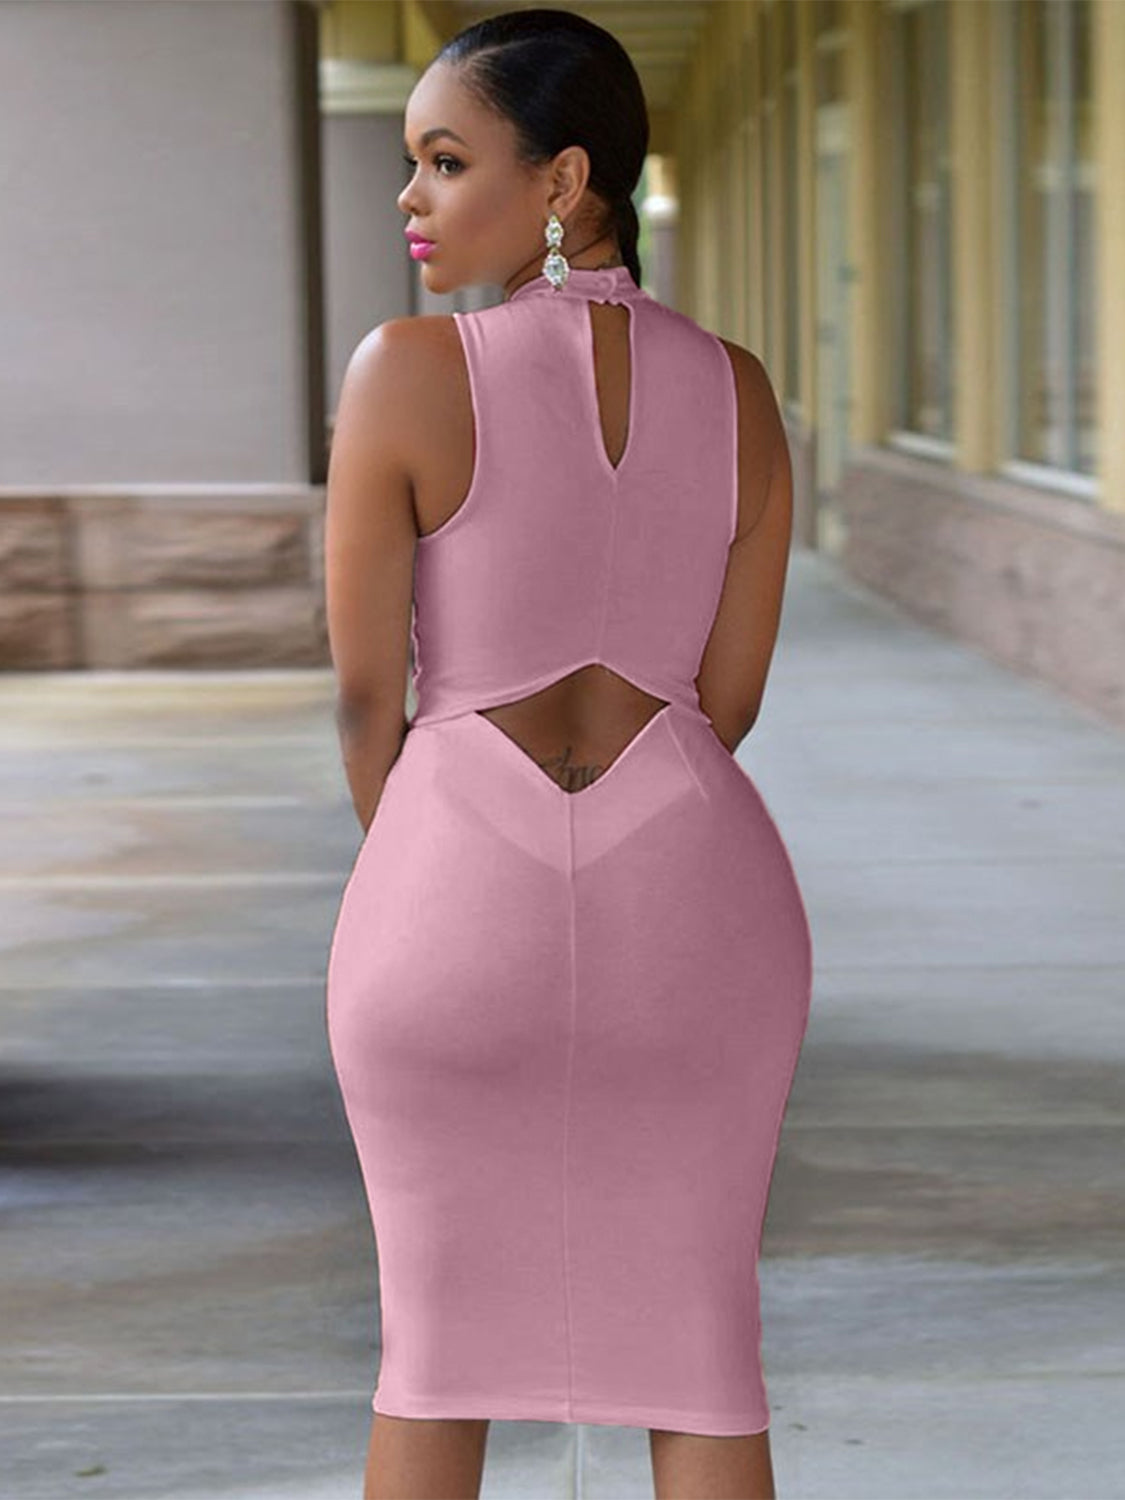 Back view of model wearing Cutout Mock Neck Sleeveless Dress in the color blush pink